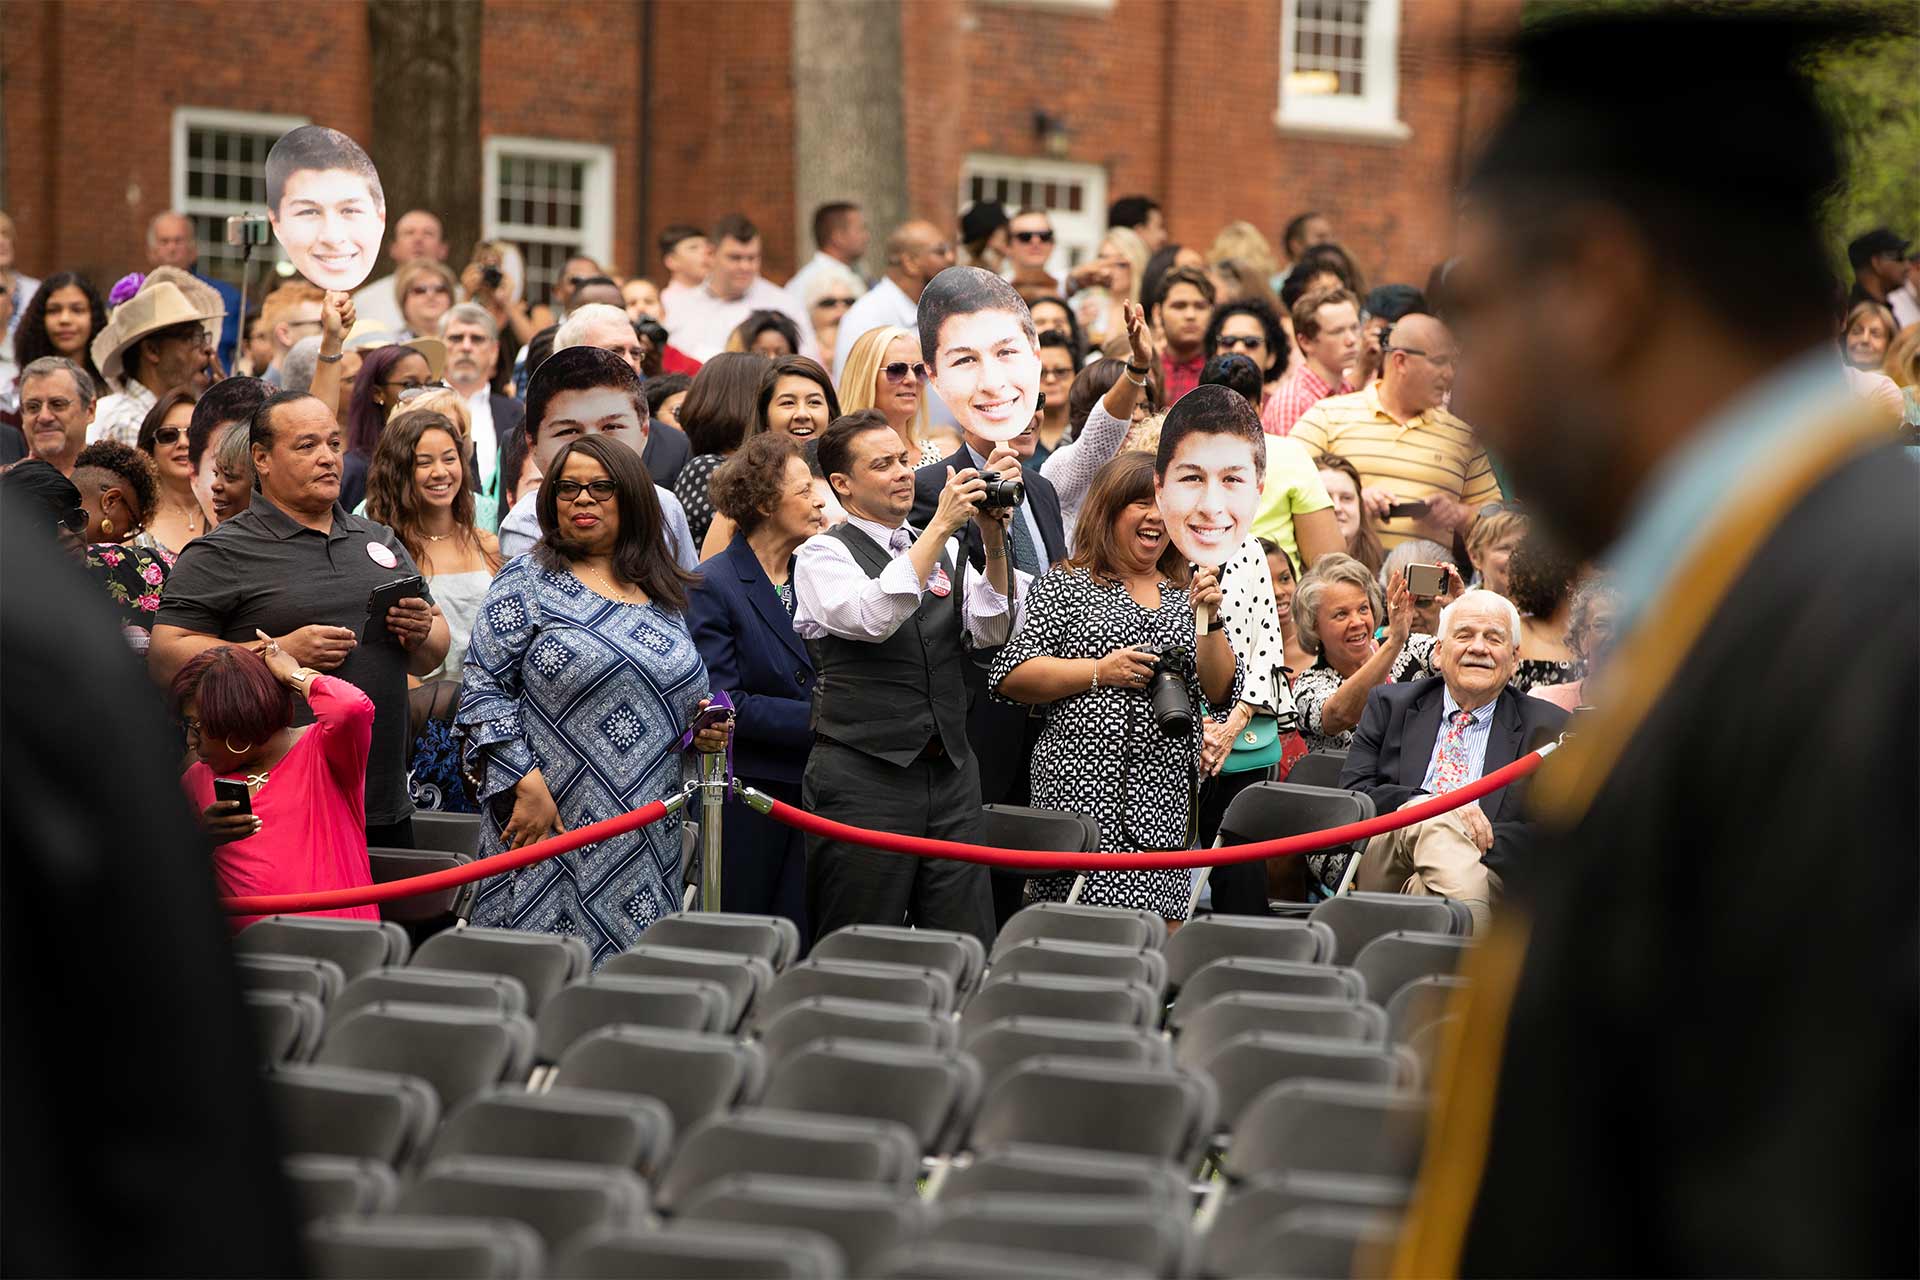 Family and friends cheer on their graduates as students are welcomed to Commencement.